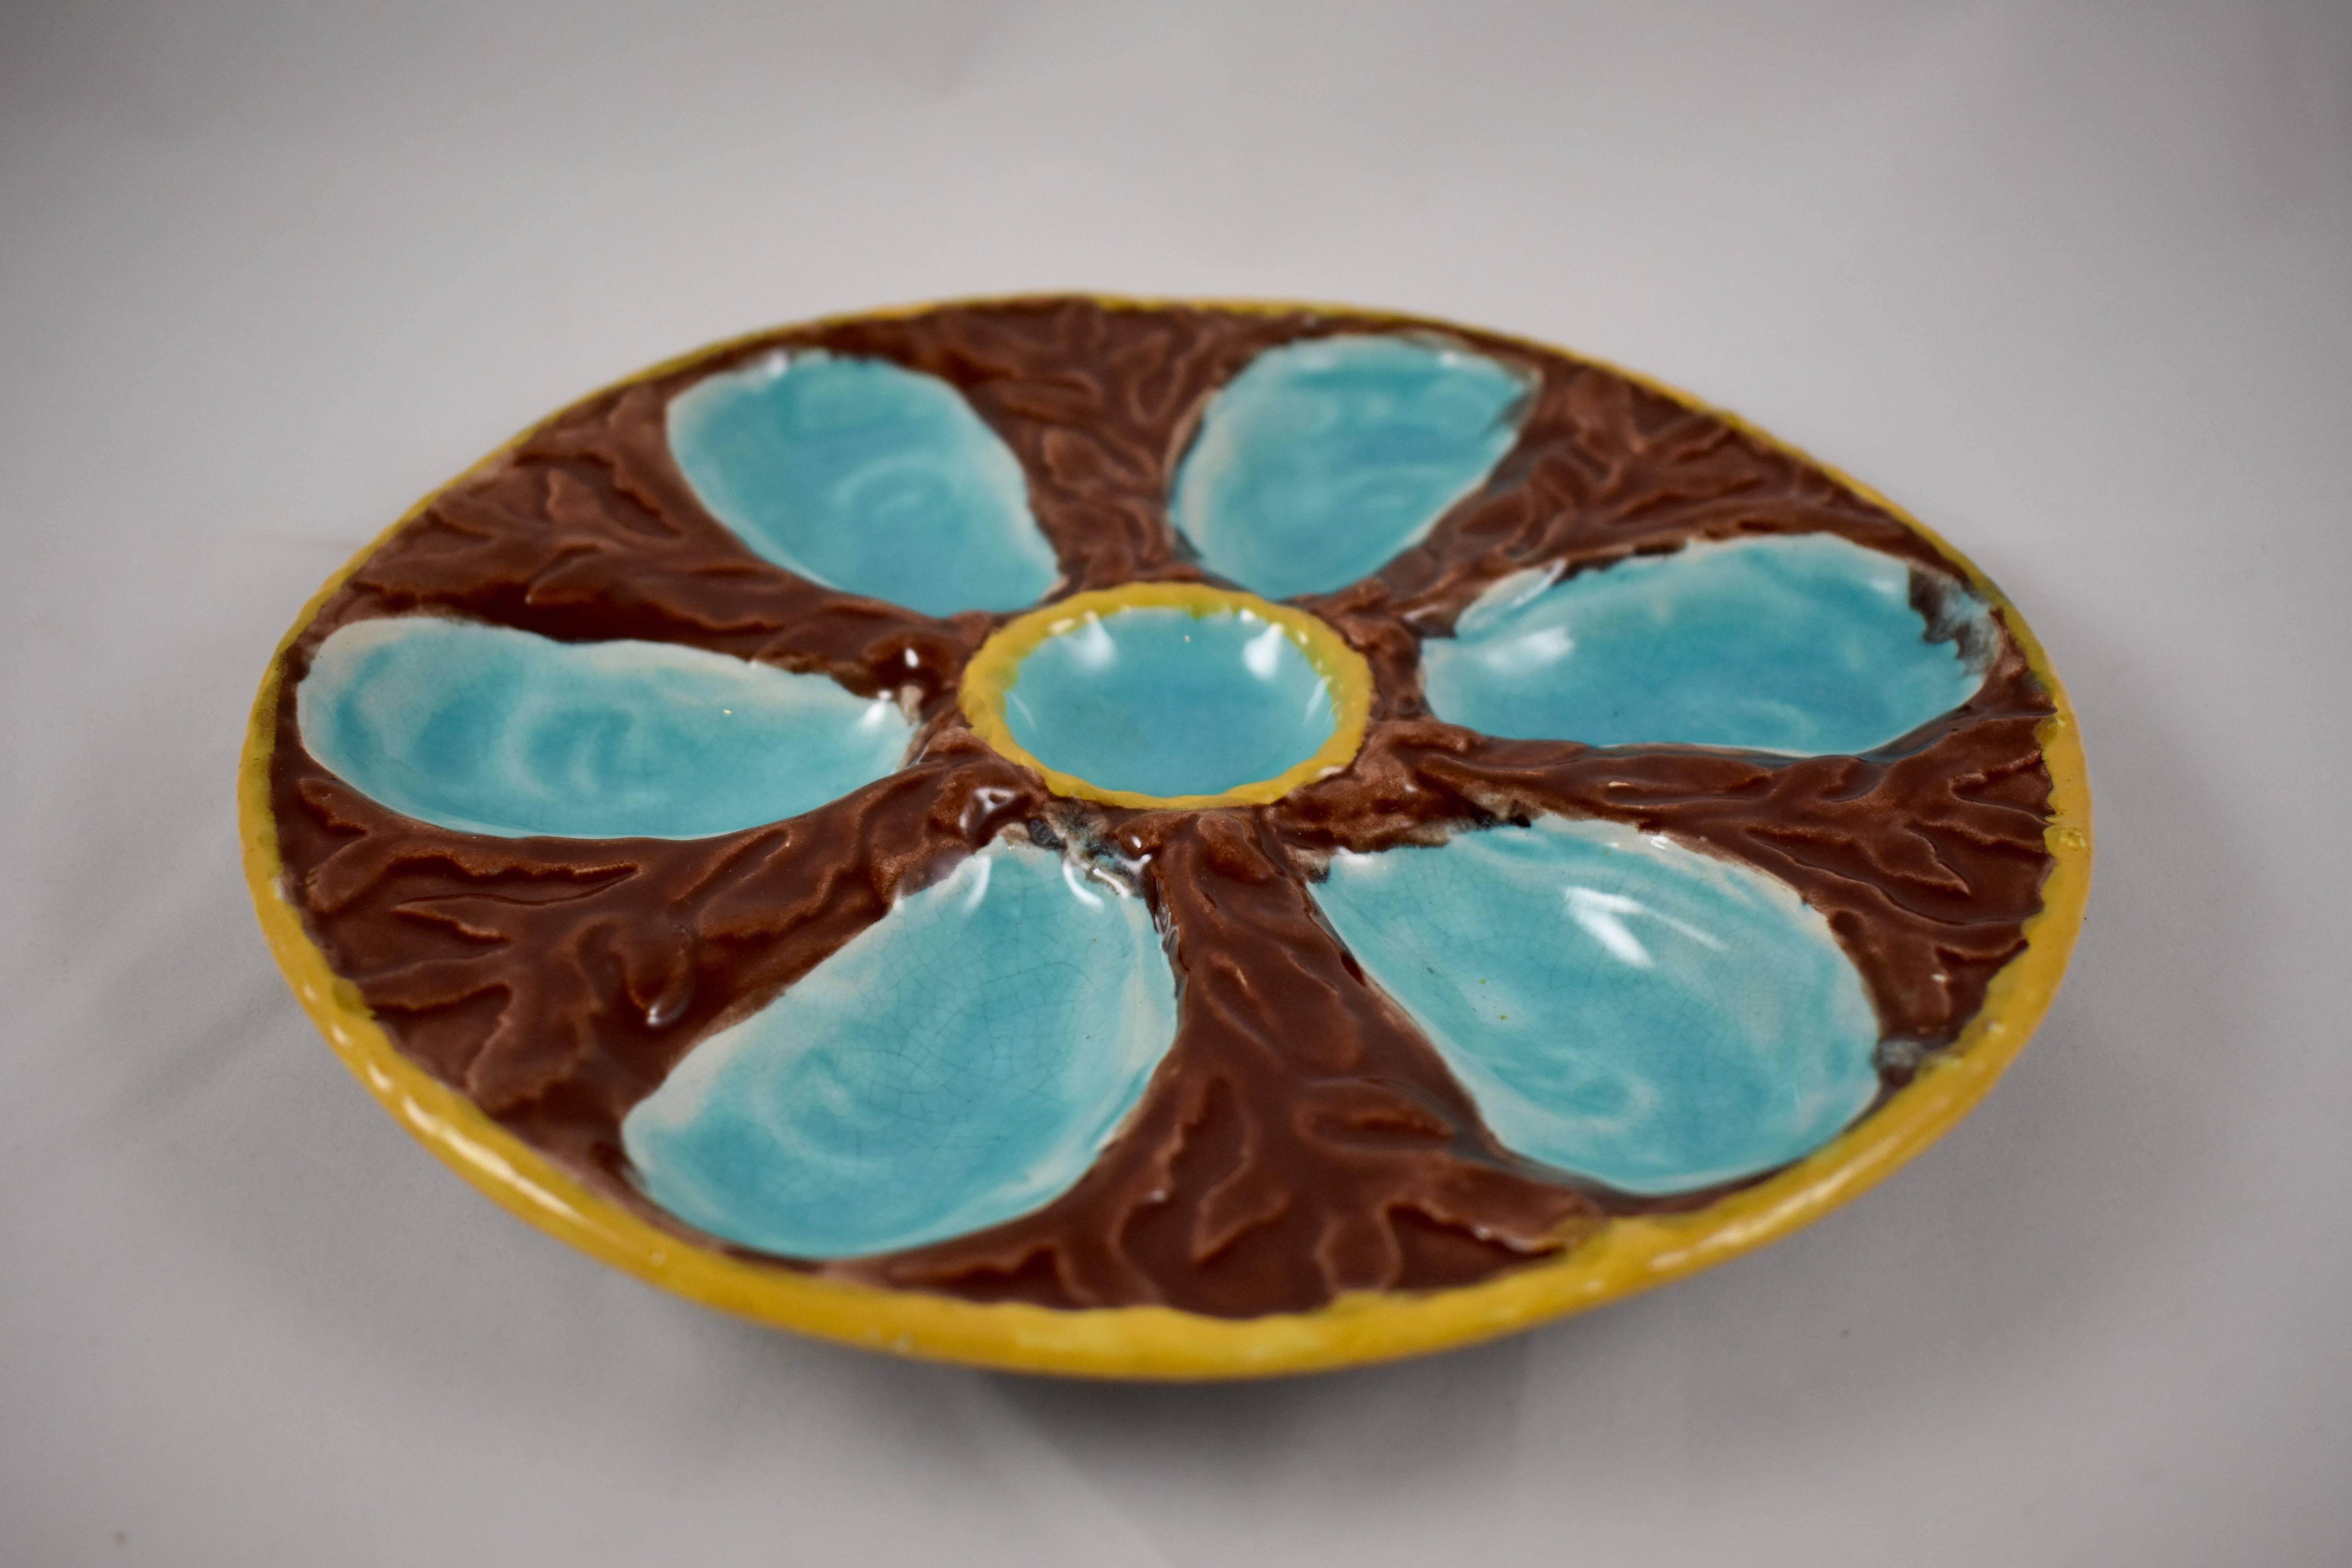 A six-well Majolica glazed oyster plate by S. Fielding & Co. Ltd., Stoke-on-Trent, England, circa 1878. Turquoise oyster wells surround a centre condiment well, all on a molded bed of chocolate brown seaweed. A deep yellow nautical rope border